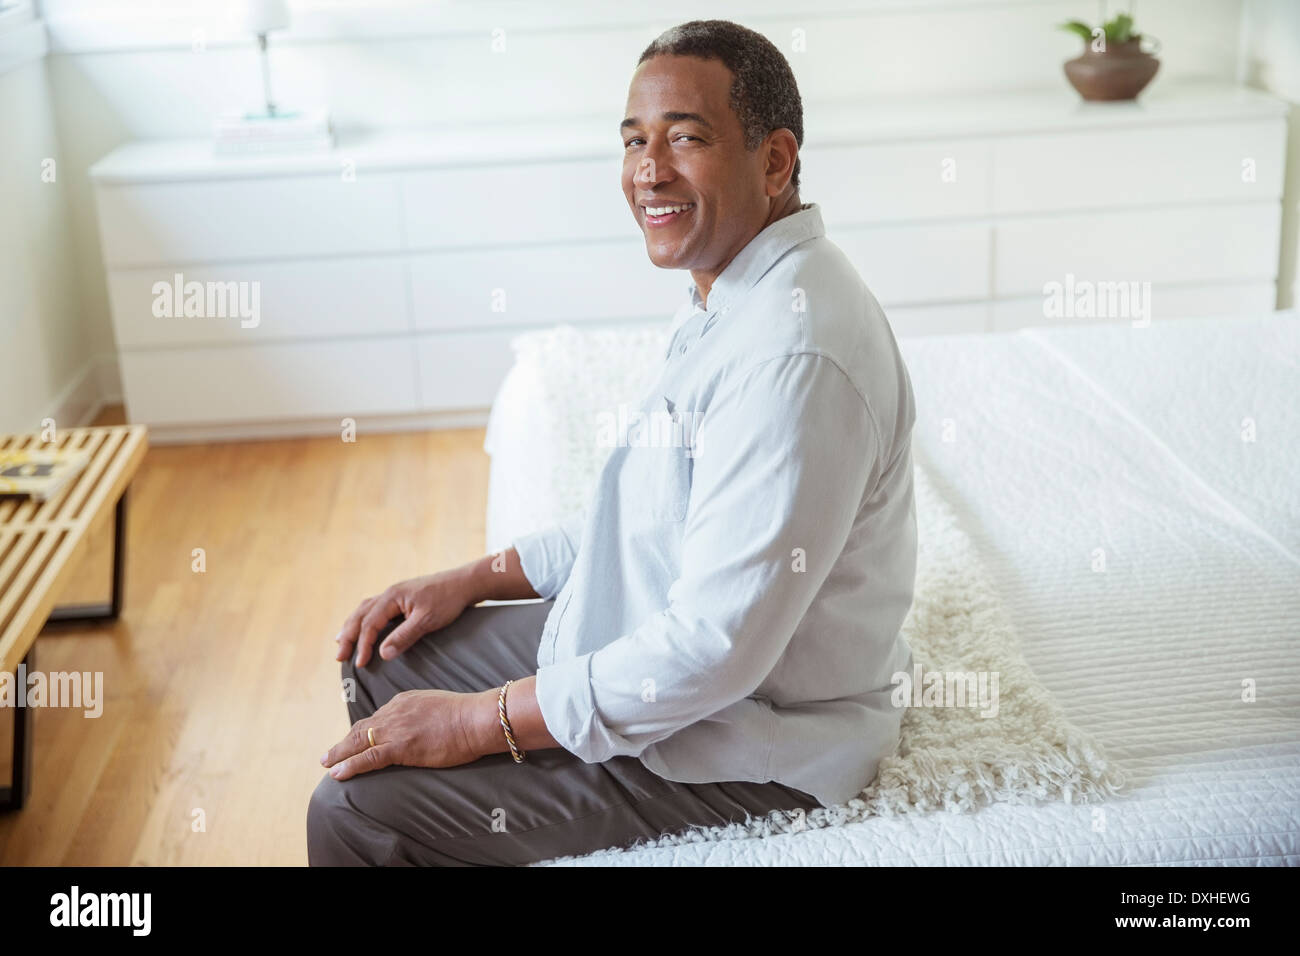 Portrait of smiling senior man sitting at the edge of bed Stock Photo